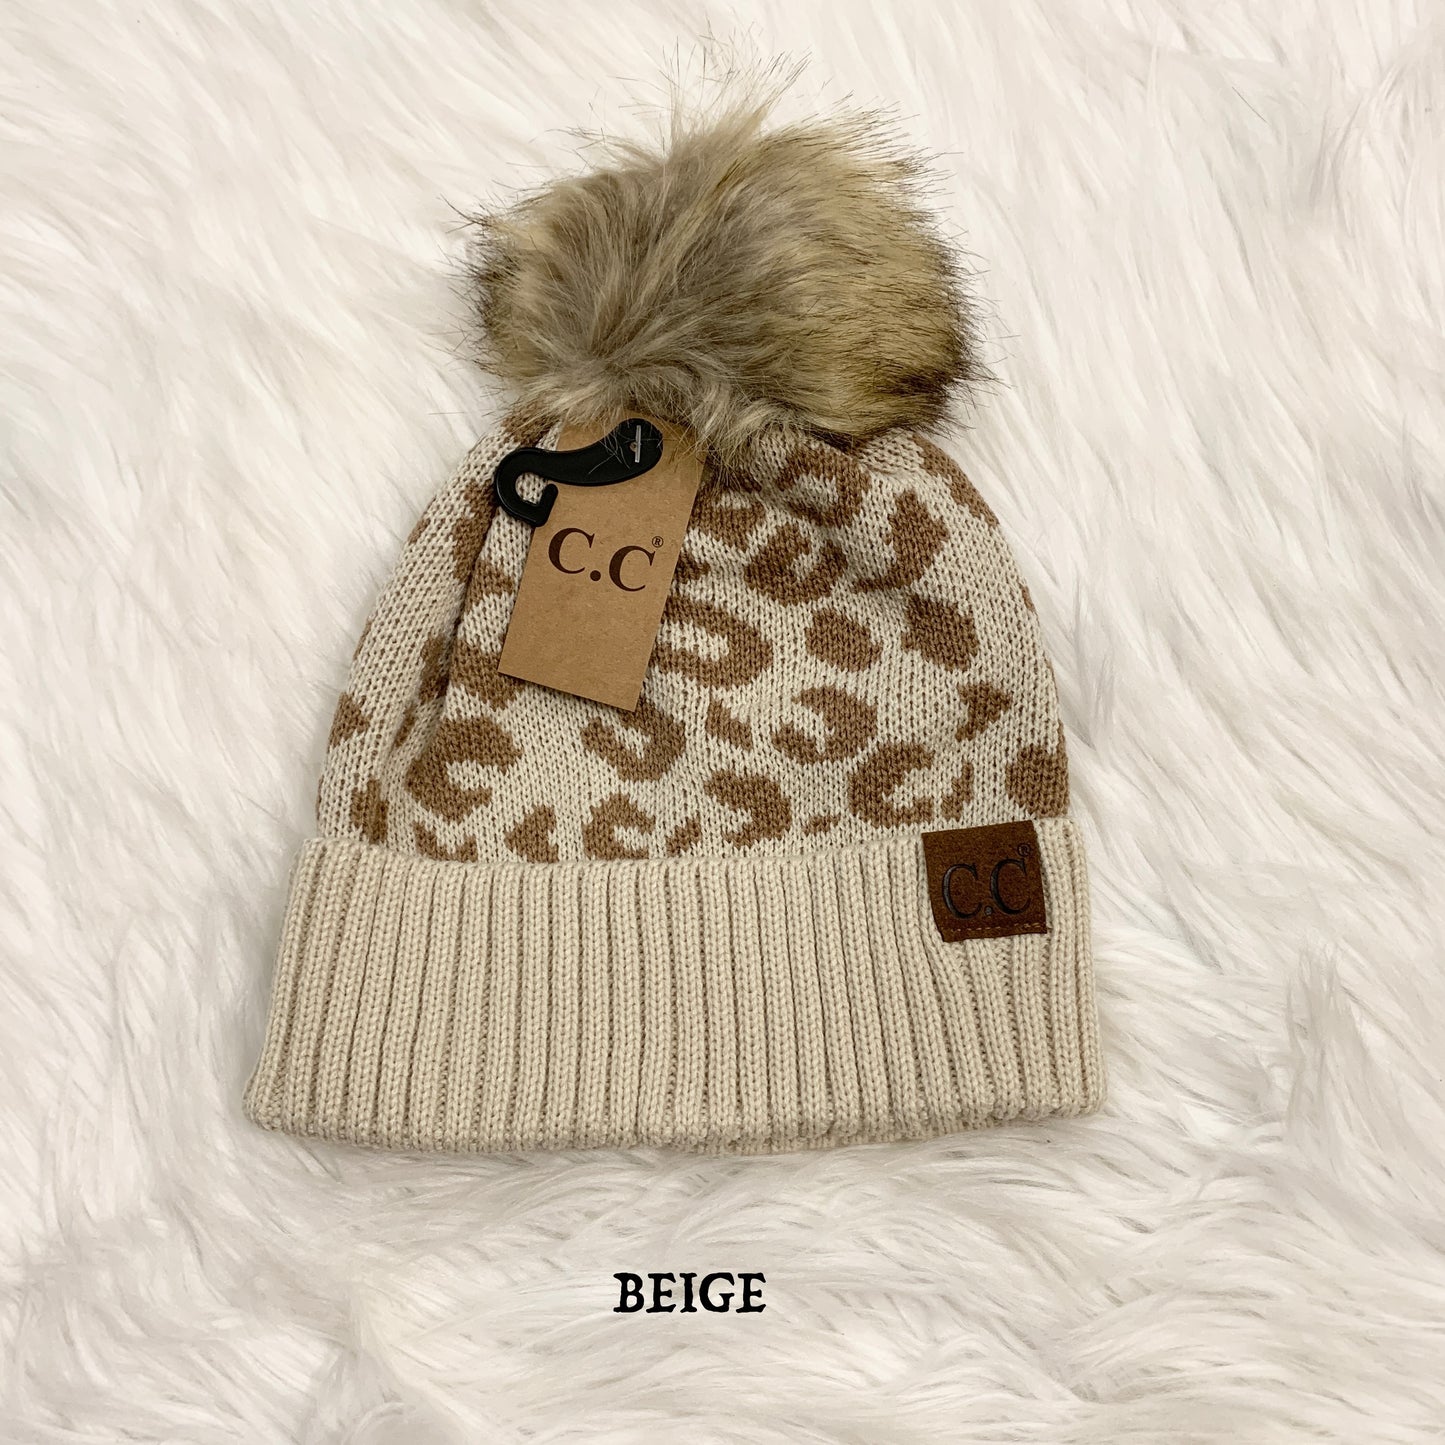 C.C Leopard Color Pom Beanie for Adults, Winter Hats, Premium Hats, Warm Hats, Winter Accessories, CCBeanies, CC Leopard Hat, Cheetah Print Beanies, Gifts for Her